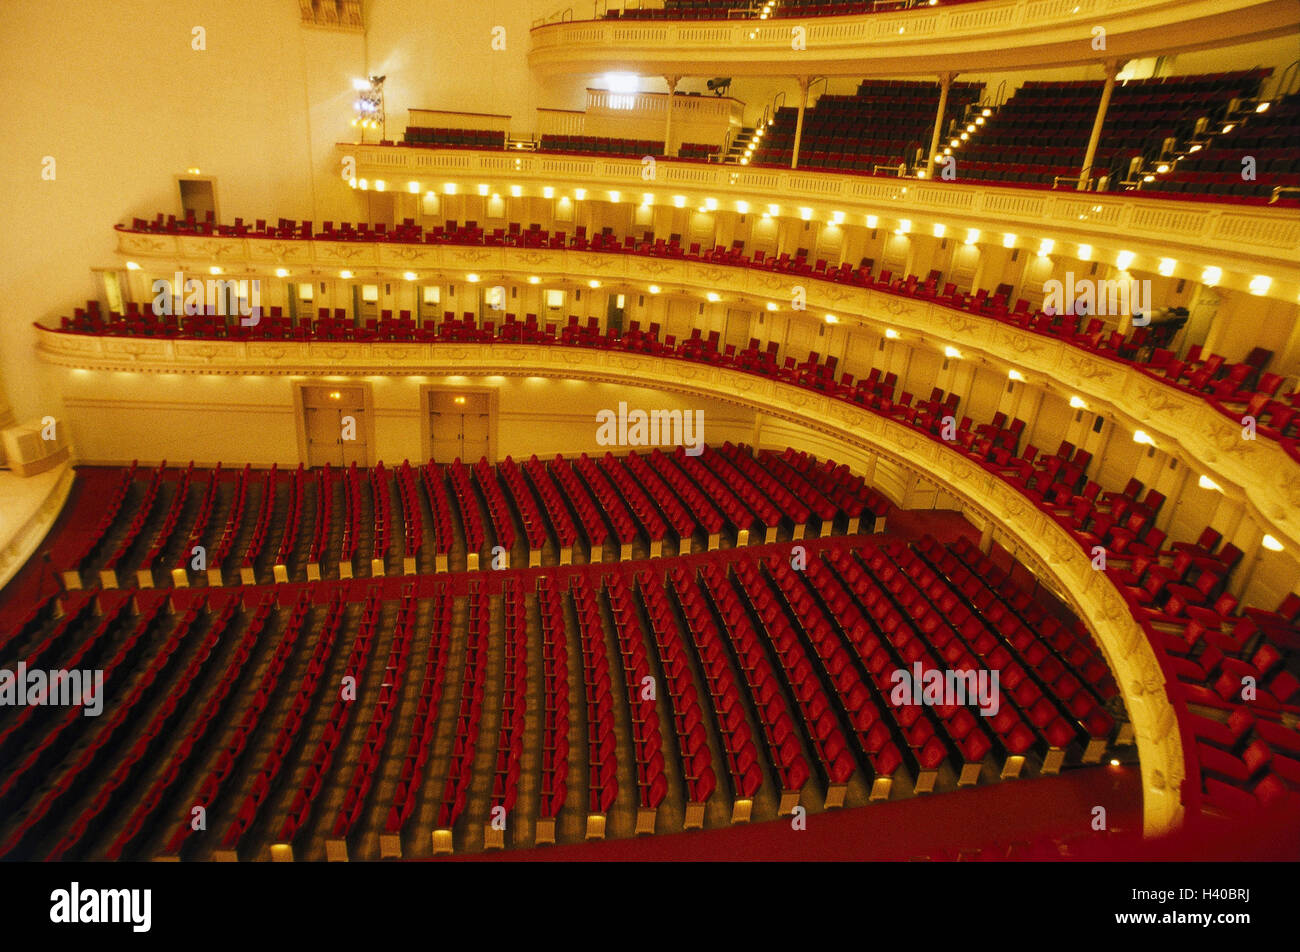 USA, New York city, Carnegie Hall, detail, the United States of America, inside, concert hall, seats, auditorium, lighting Stock Photo